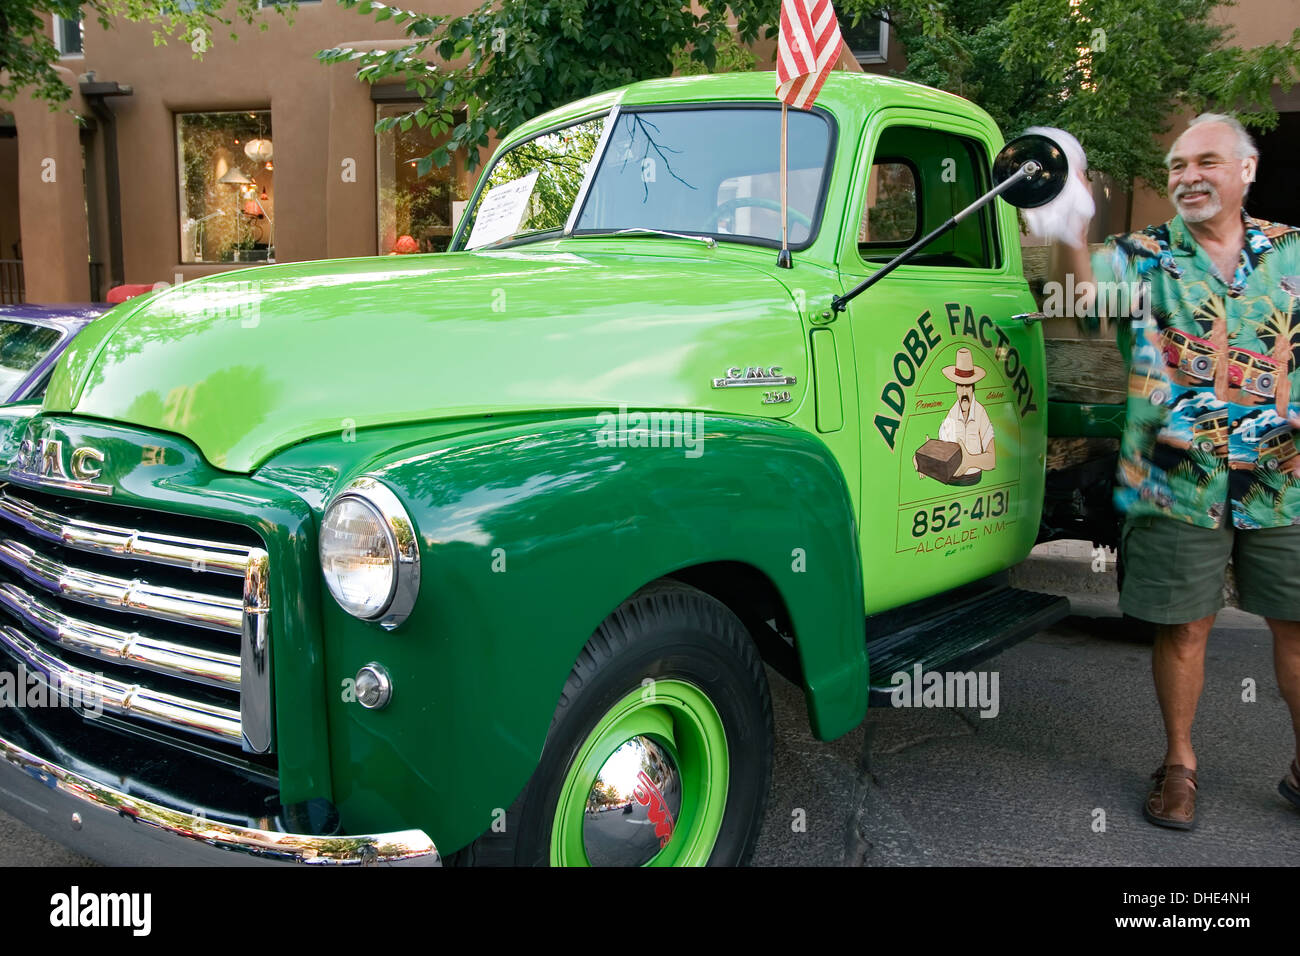 'Adobe Factory' antique GMC truck and owner, Pancakes on the Plaza Fourth of July Celebration, Santa Fe, New Mexico USA Stock Photo